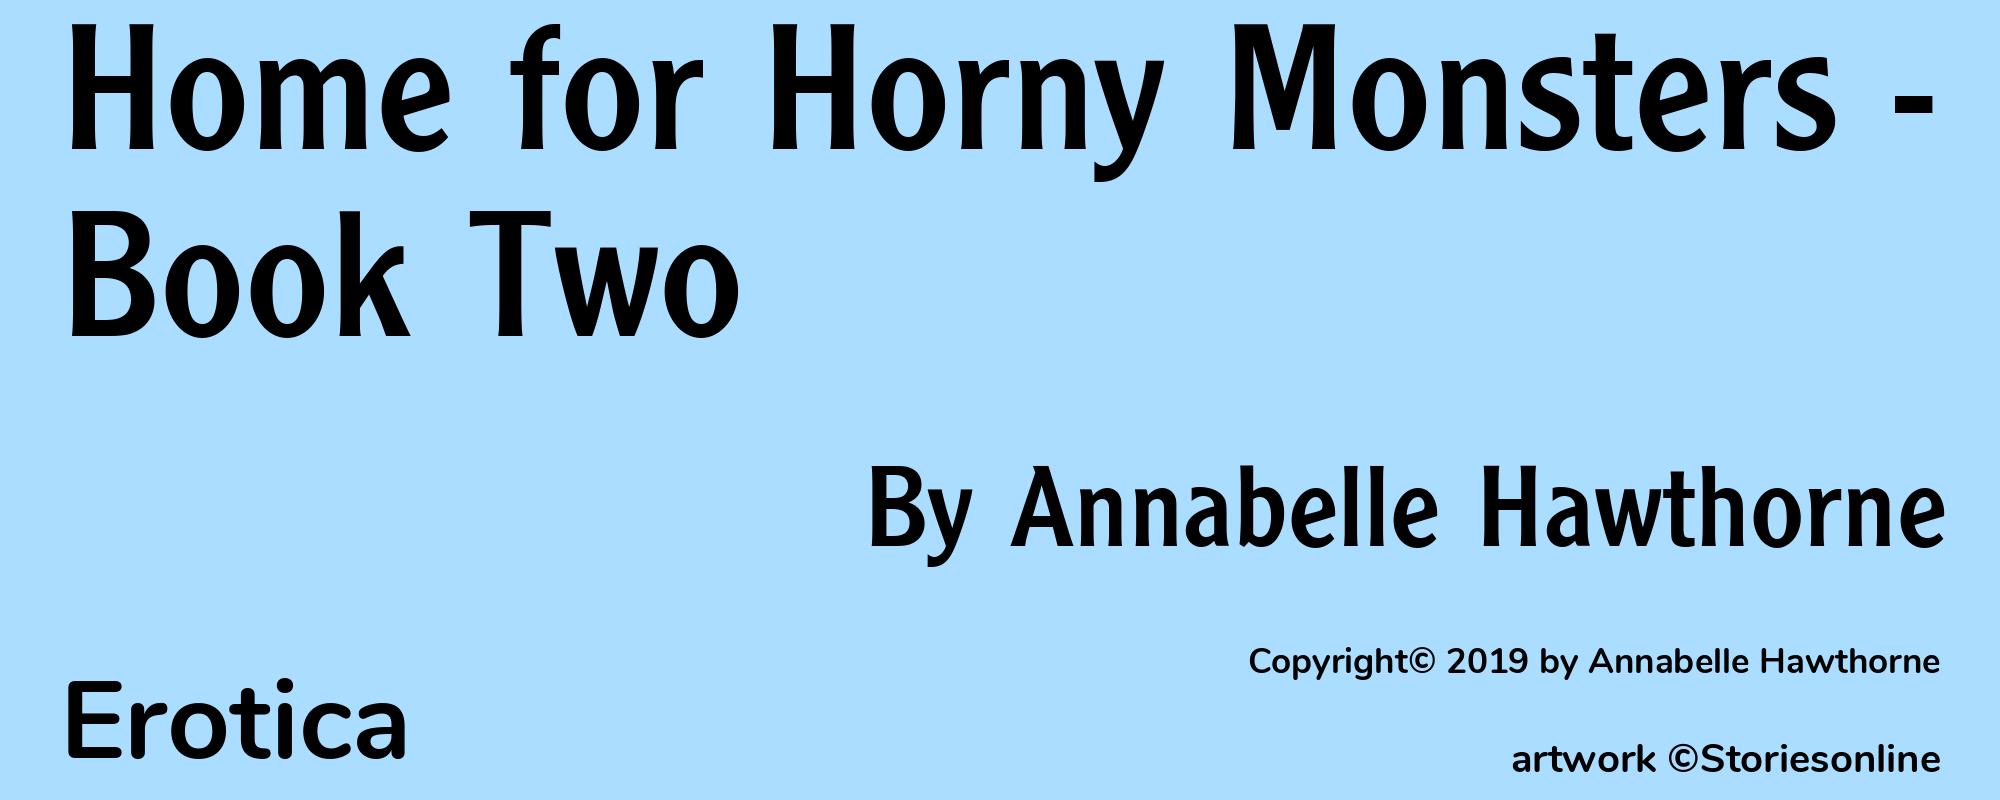 Home for Horny Monsters - Book Two - Cover